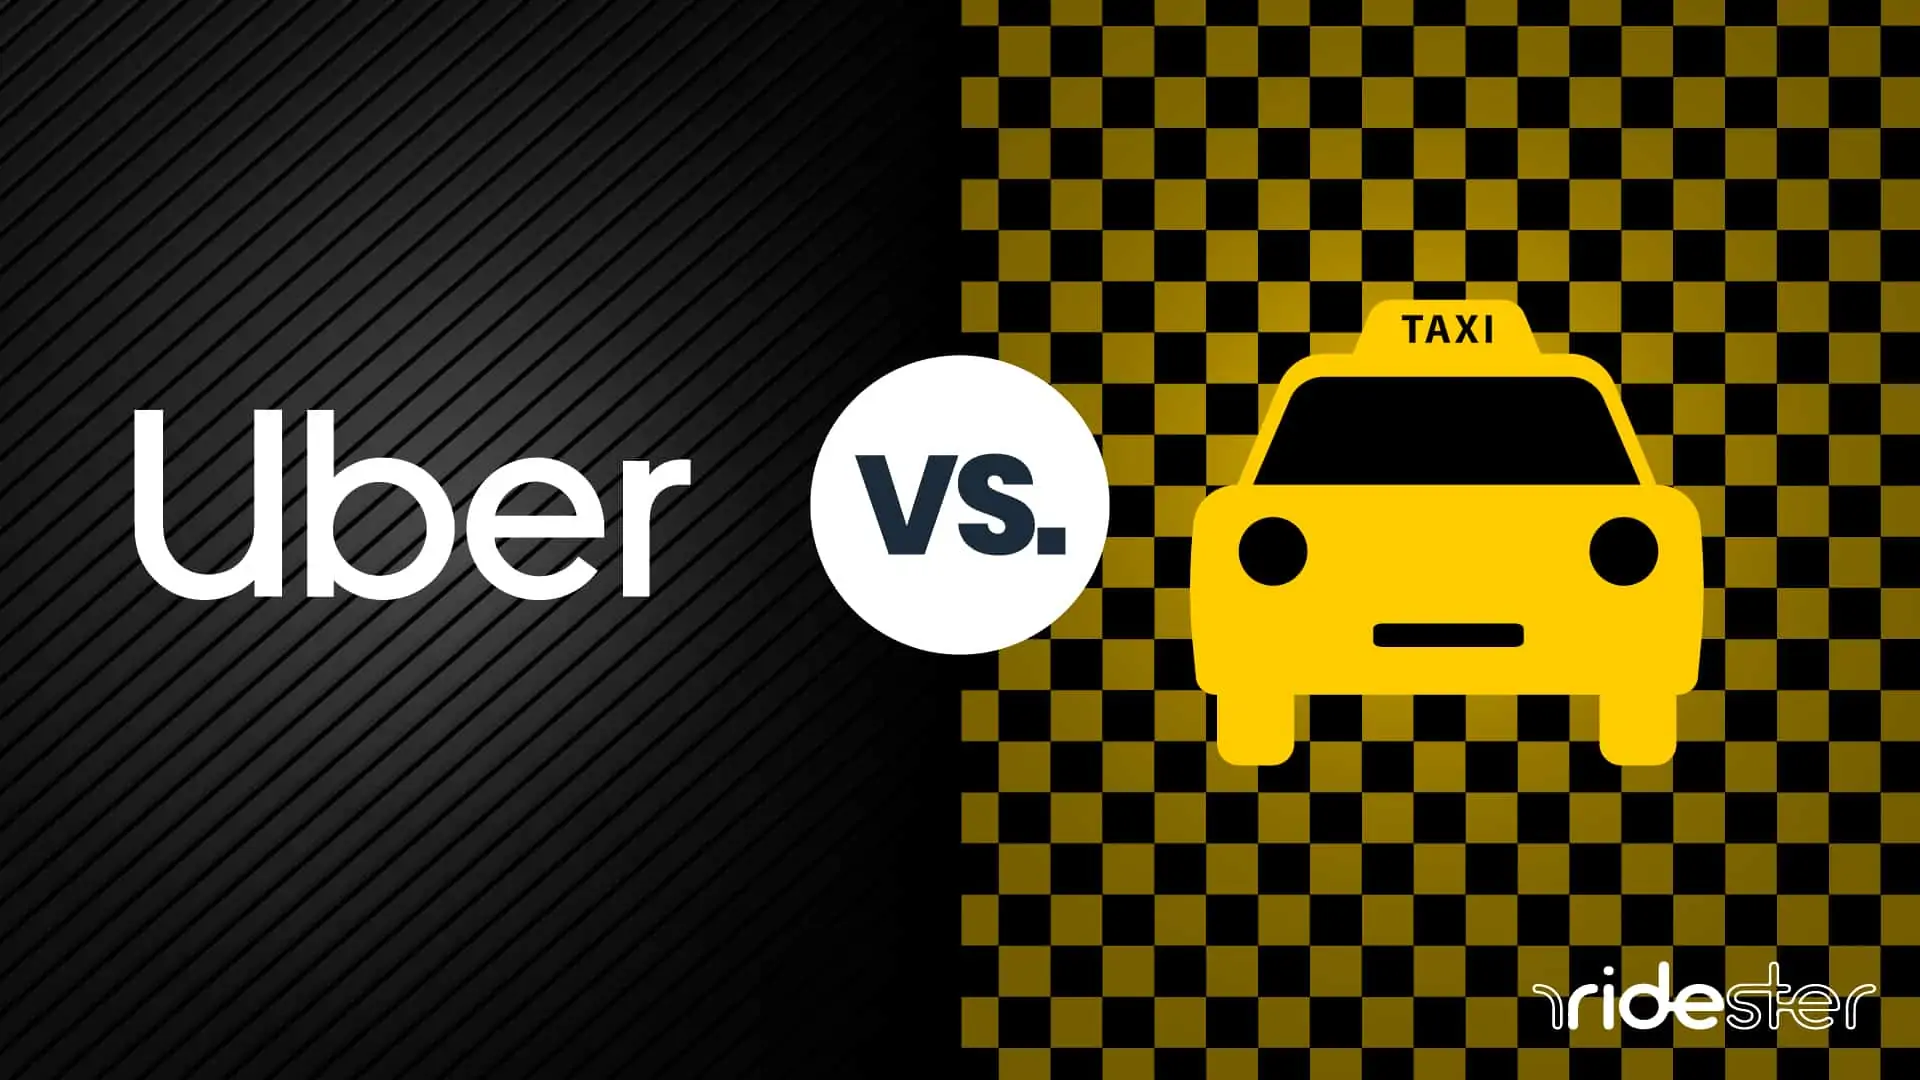 vector graphic showing uber vs taxi